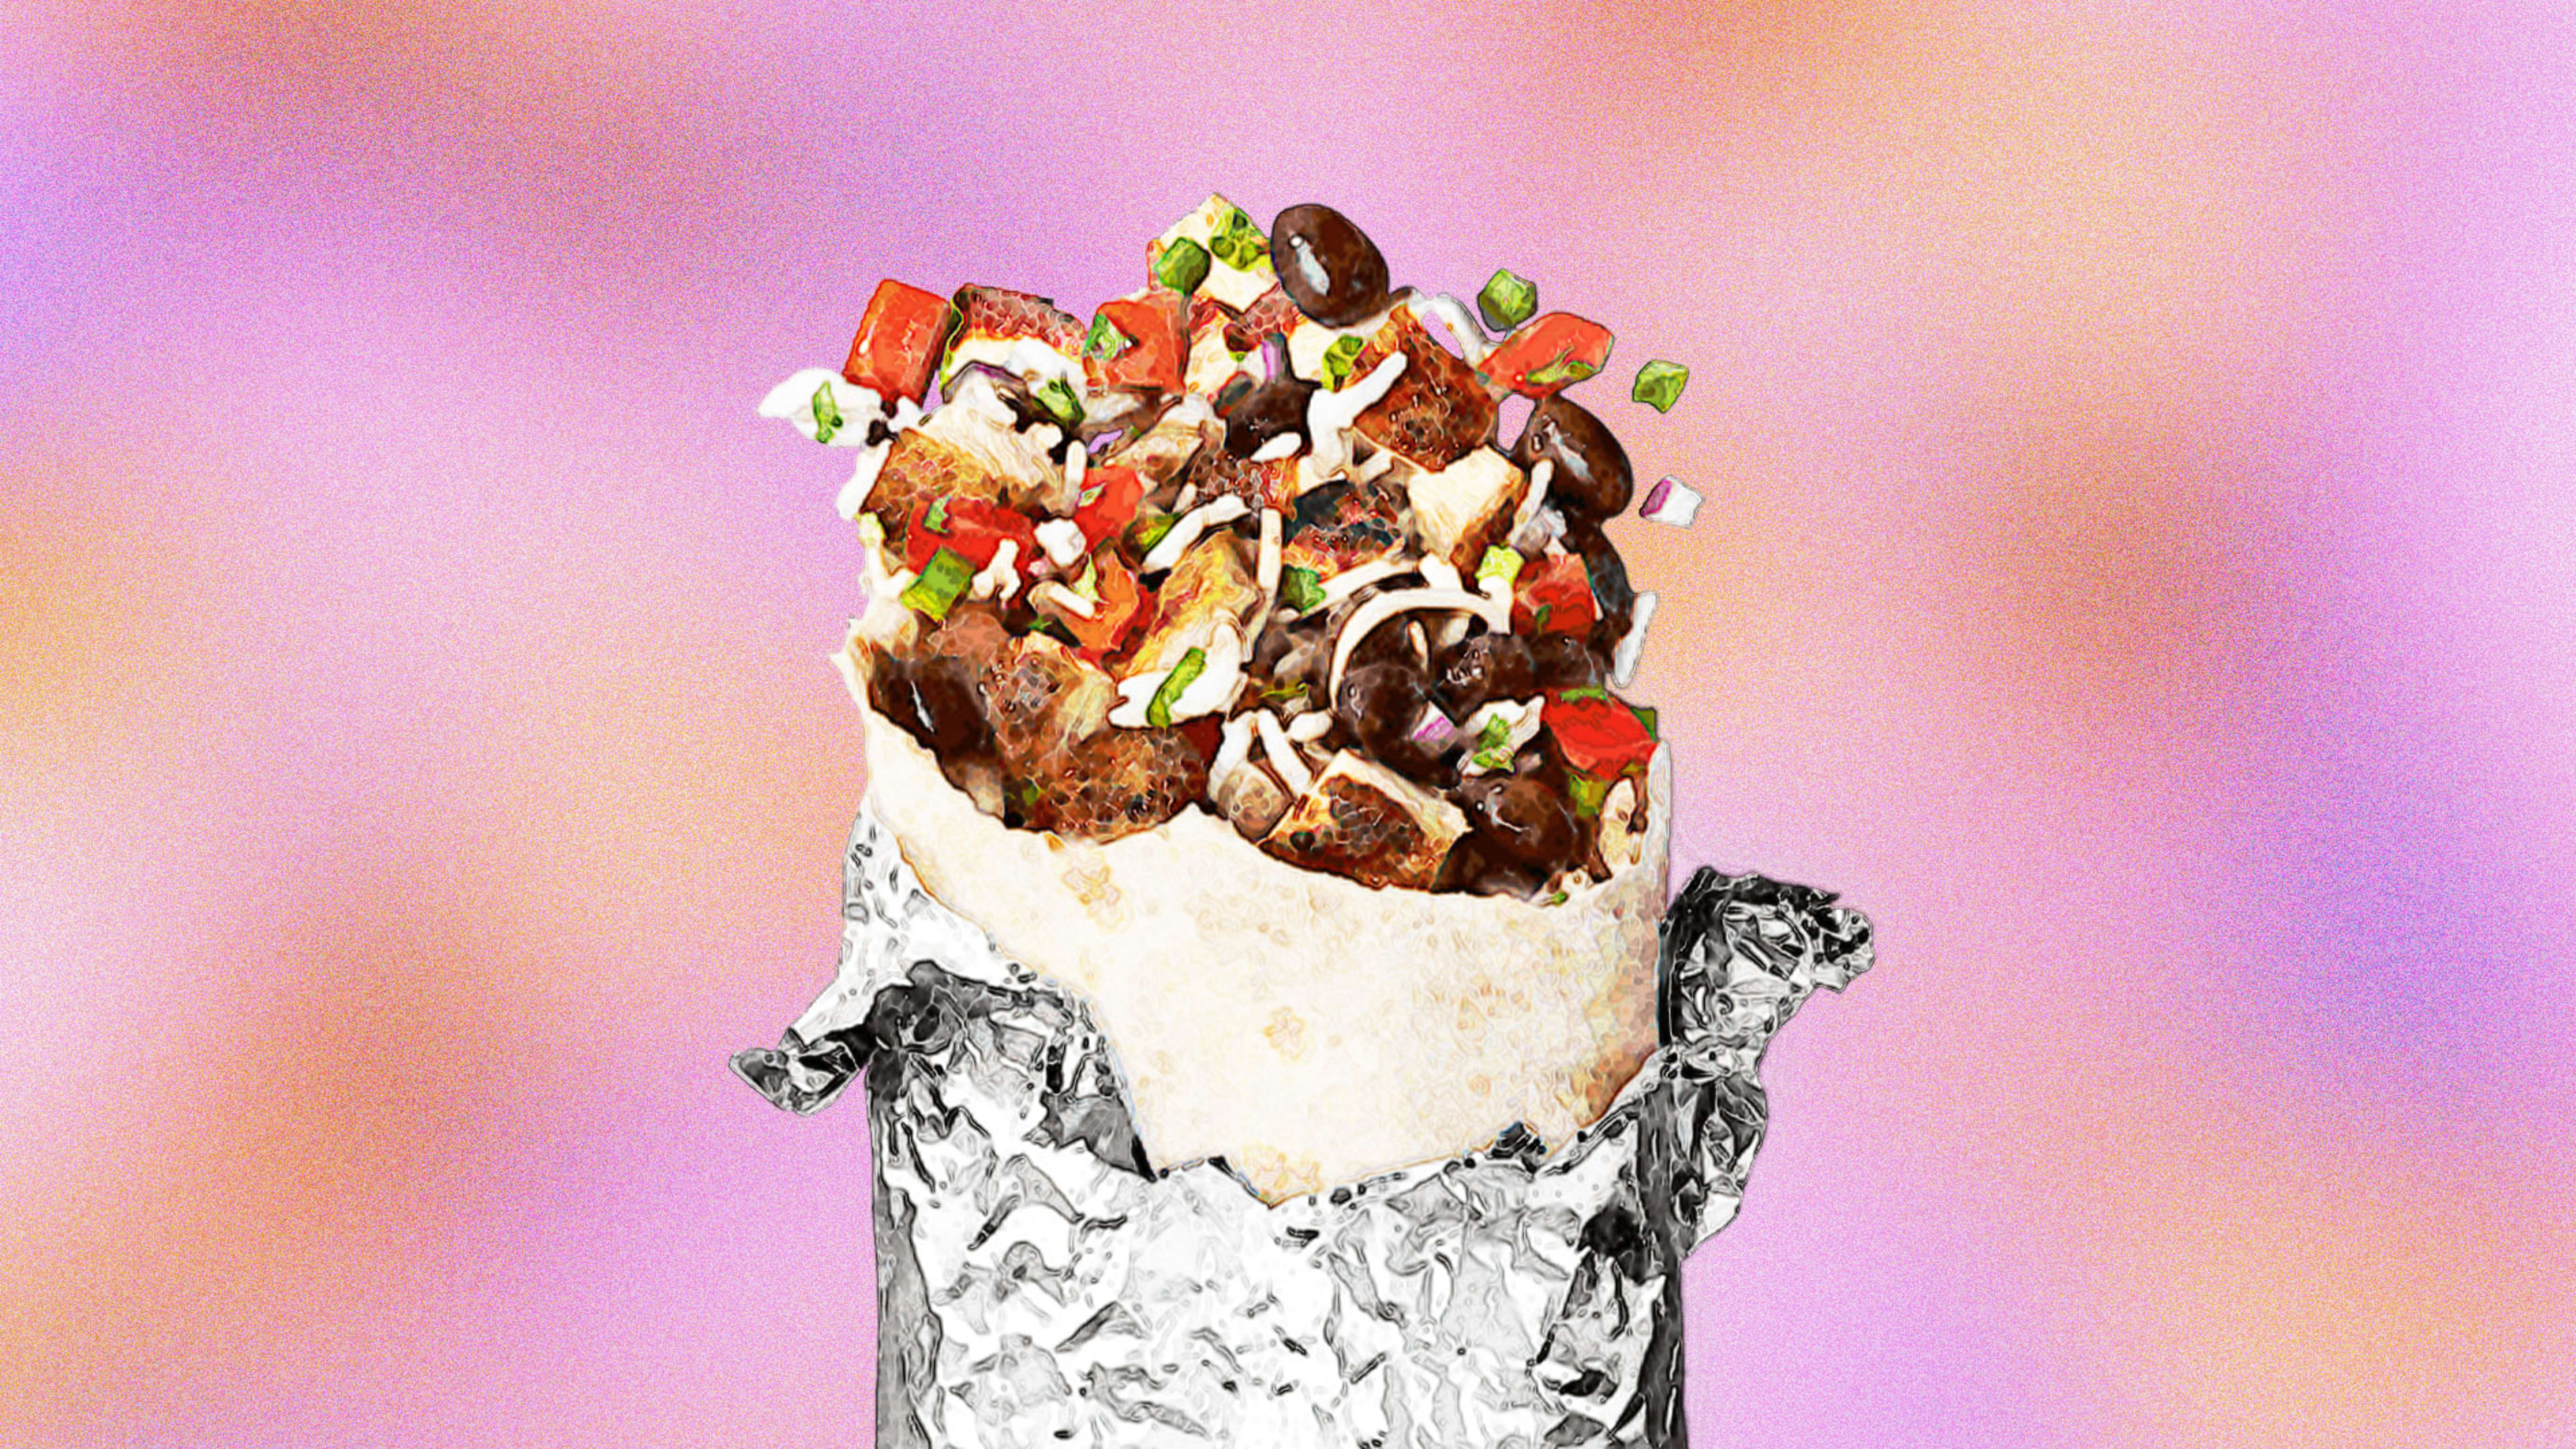 Chipotle is hiring thousands of workers  for ‘burrito season,’ and it really wants Gen Z to apply